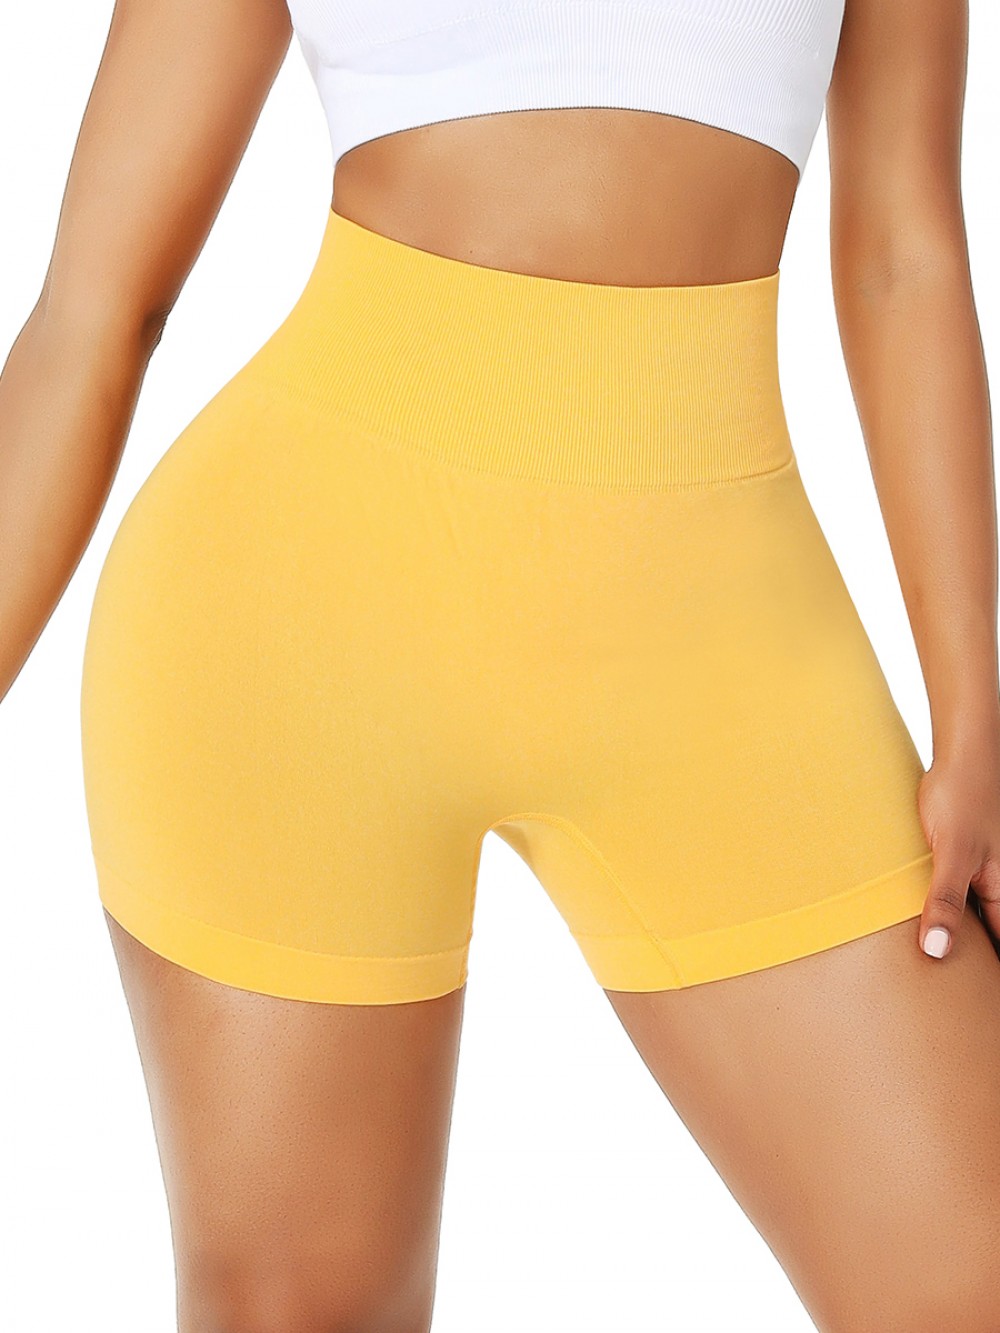 Breathable Yellow Thigh Length Seamless Athletic Shorts Stretch